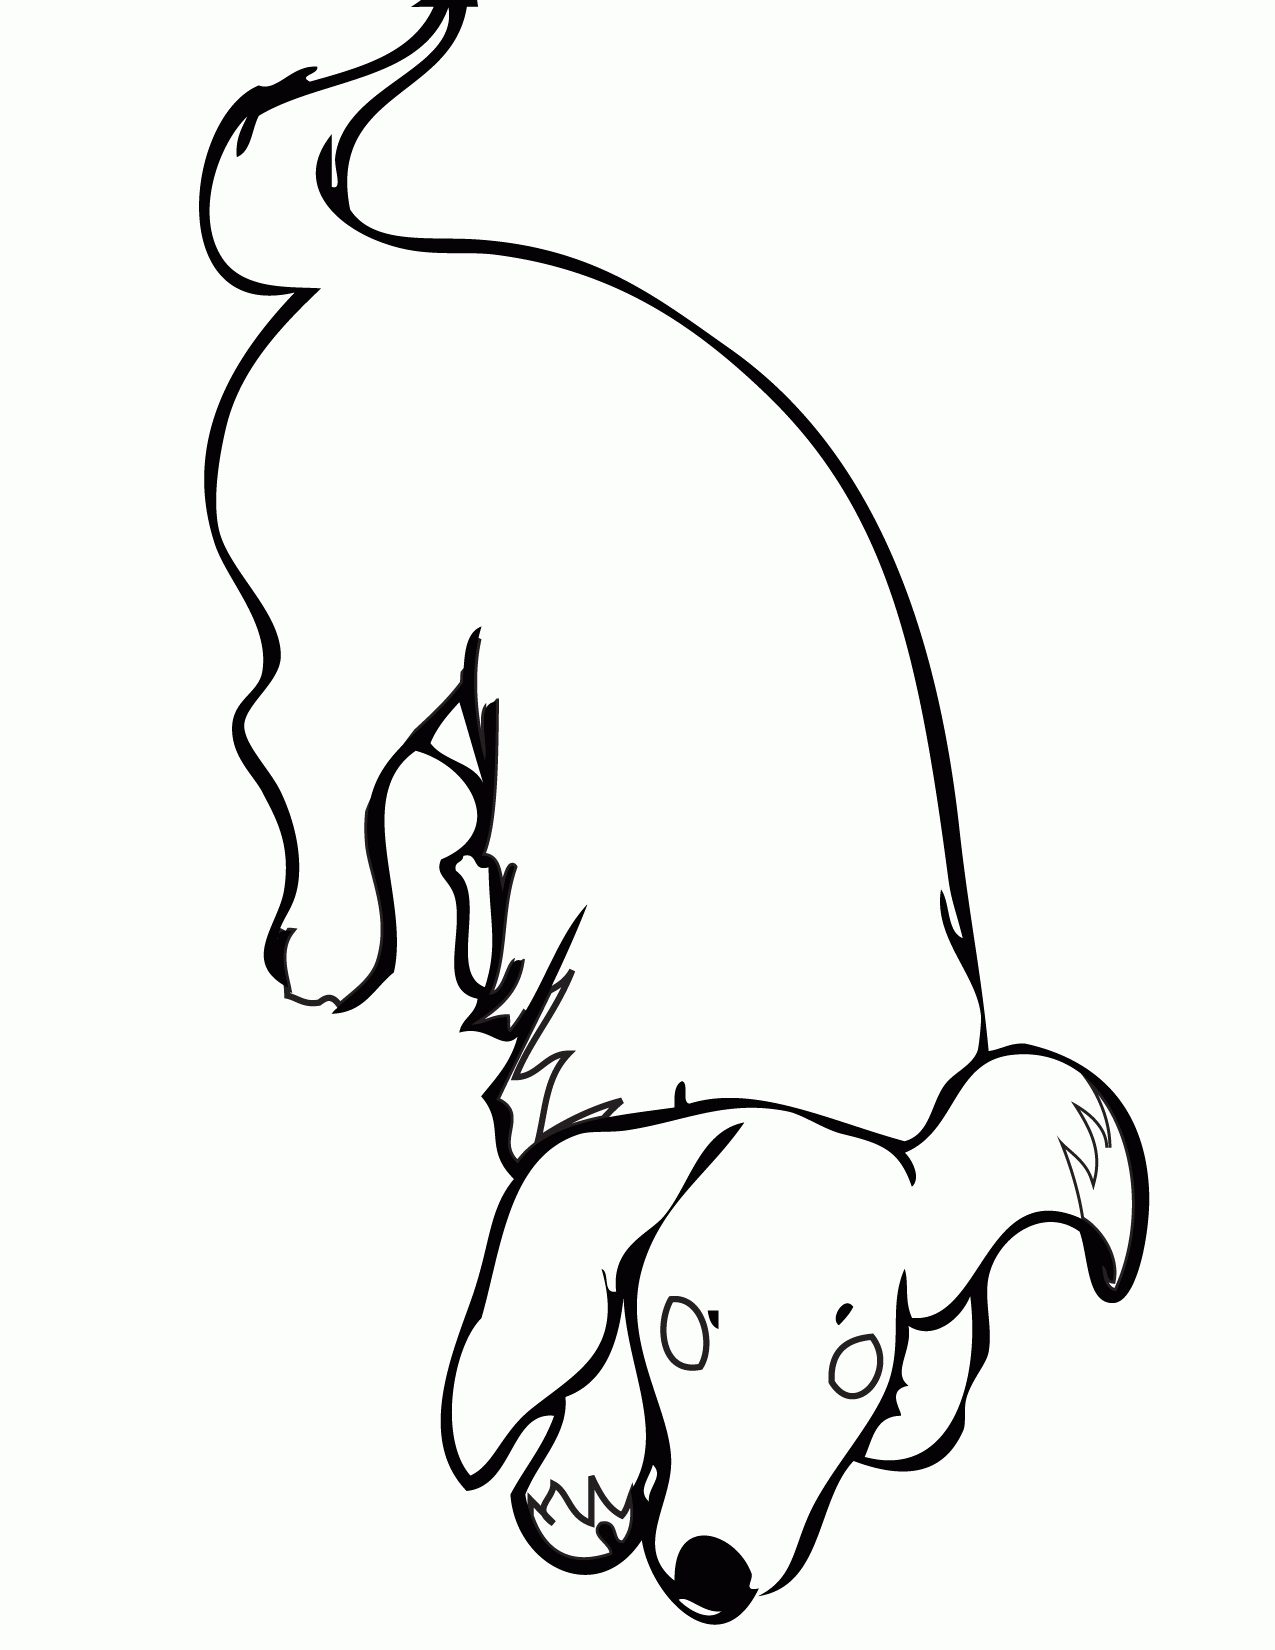 Dachshund Coloring Page - Handipoints